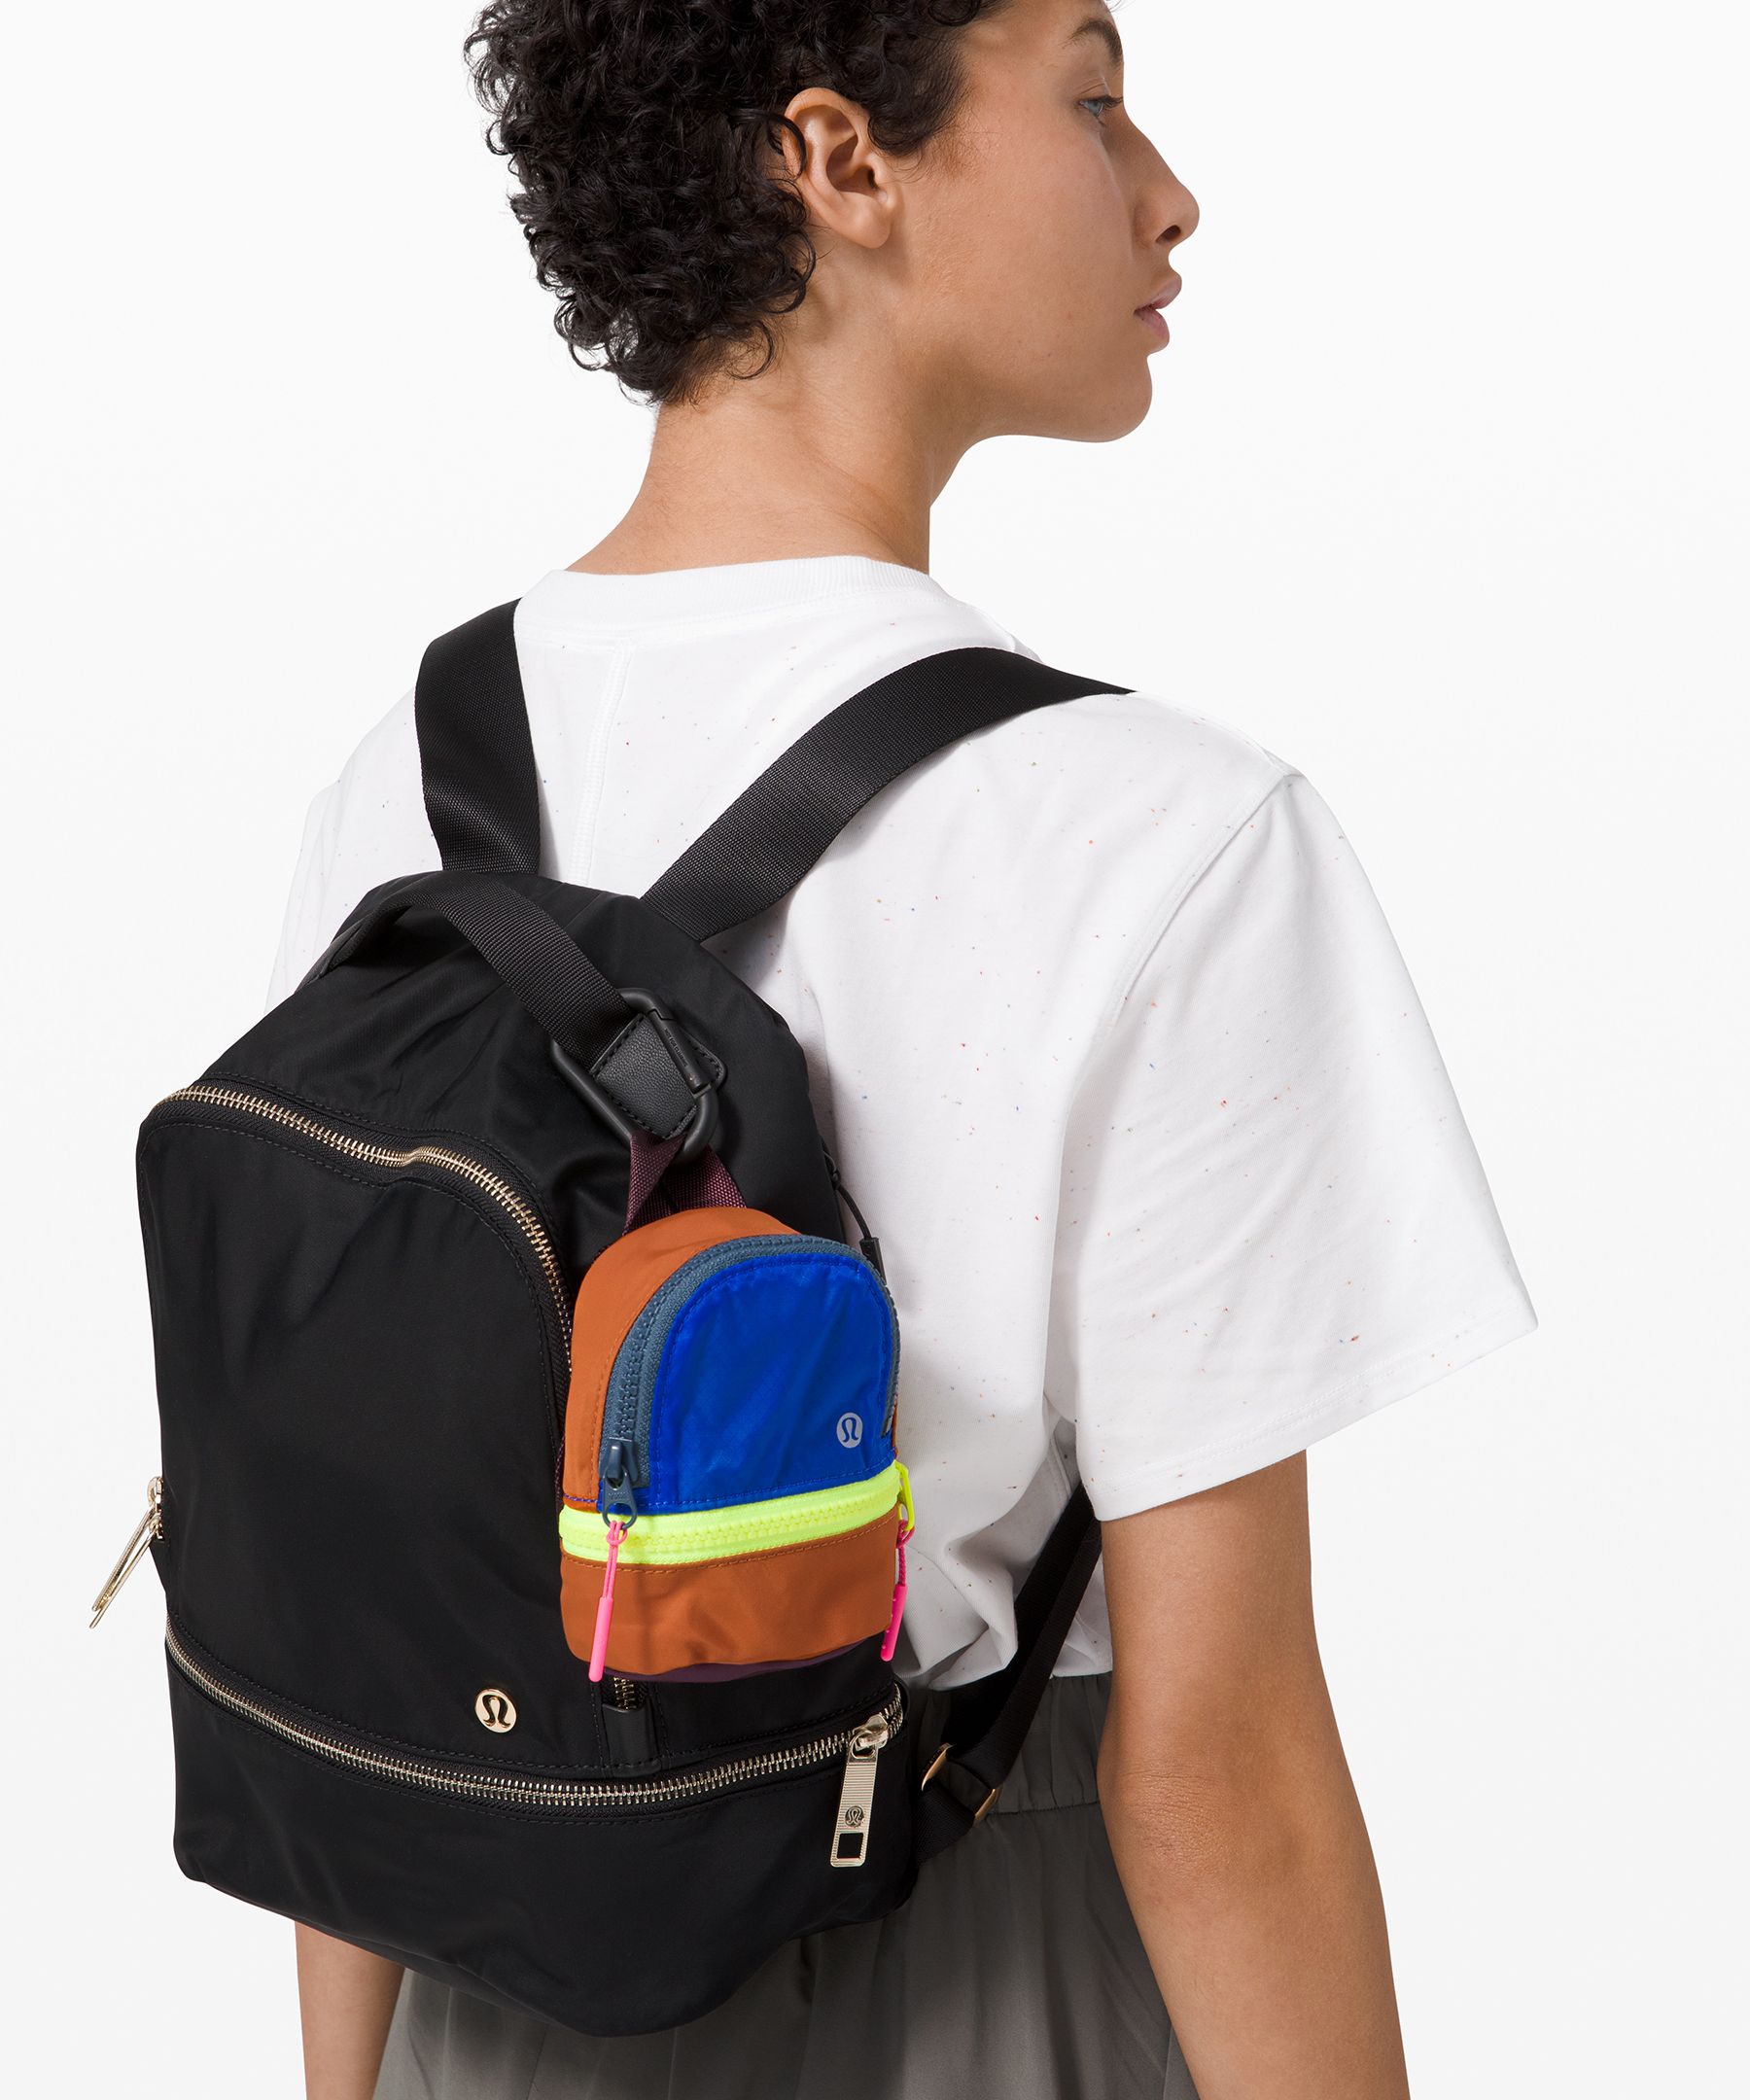 This lululemon Mini Nano Backpack is Small - But Still Holds SO Much!